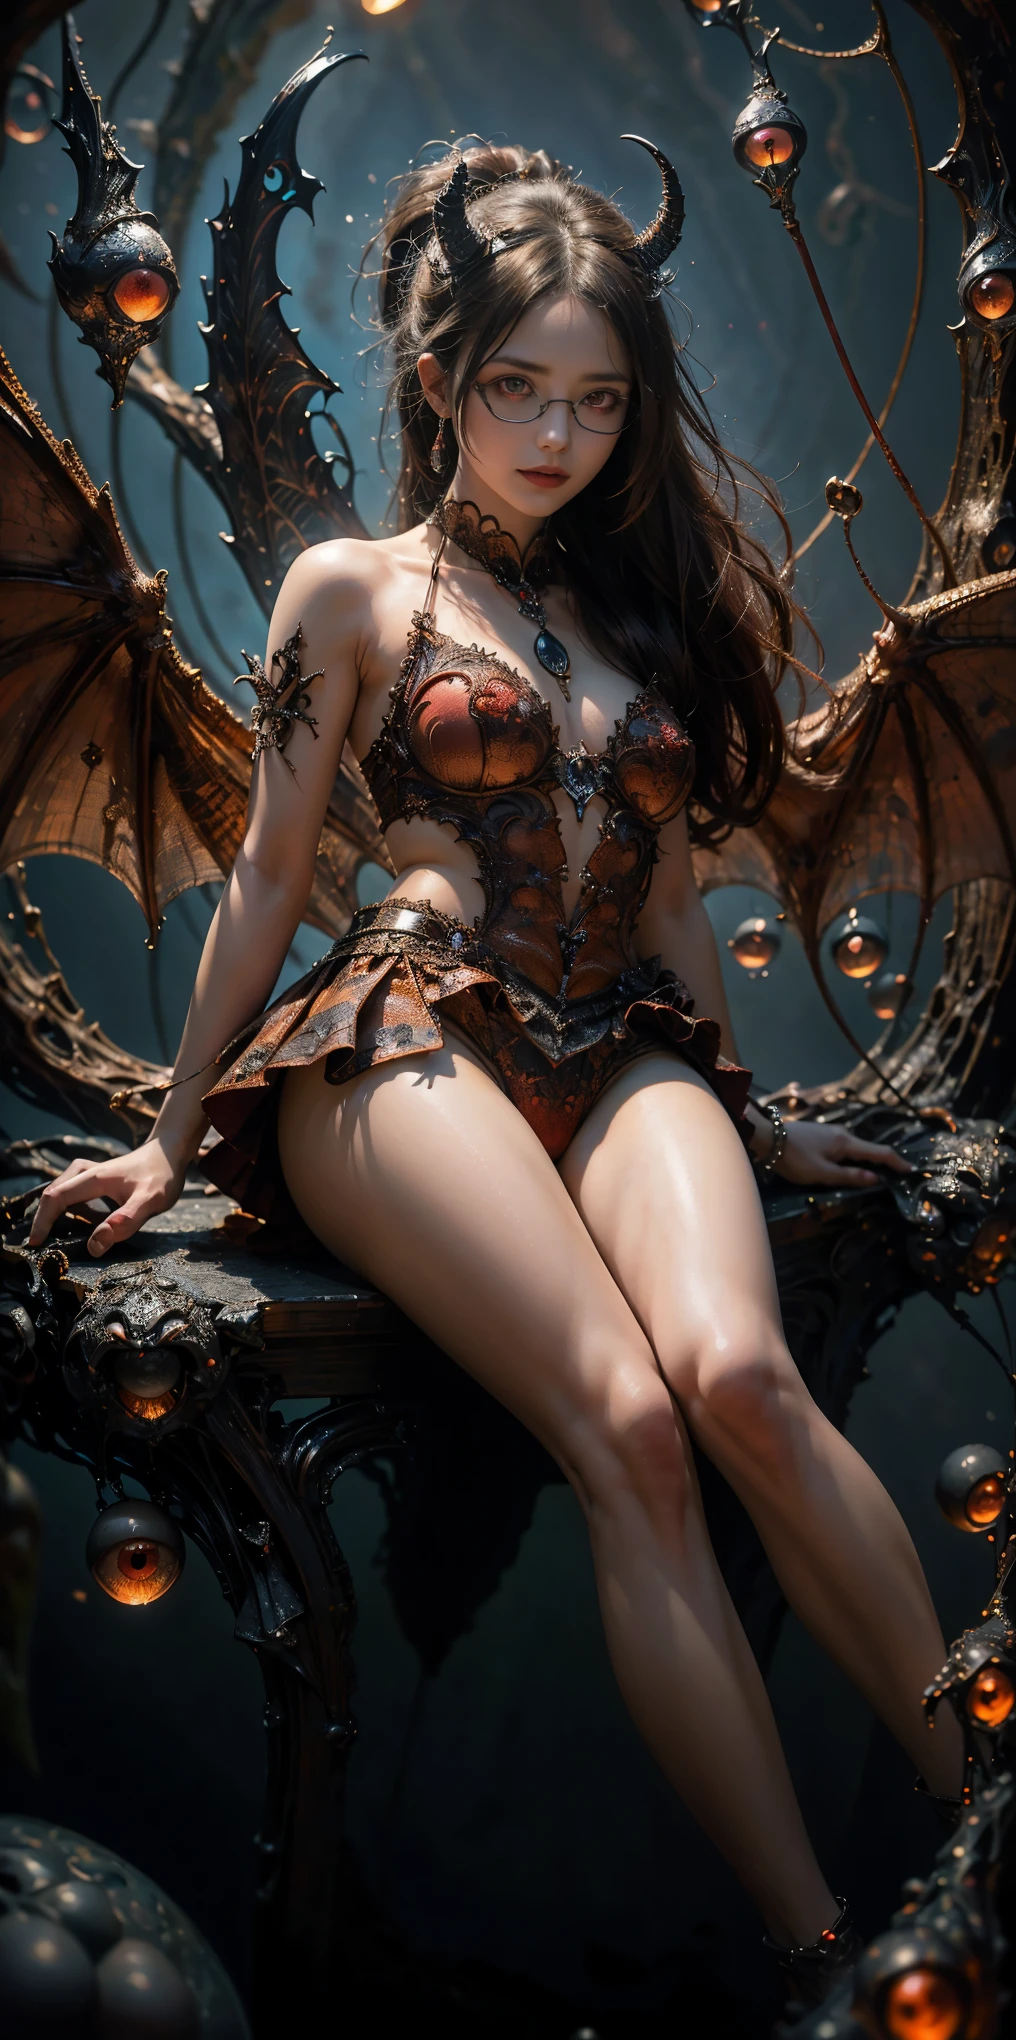 (The best illustrations)、realisitic、ultra-detailliert、The best lighting、Best Shadows、alluring succubus, ethereal beauty, perched on a cloud, (fantasy illustration:1.3), enchanting gaze, captivating pose, delicate wings, otherworldly charm, mystical sky, (Luis Royo:1.2), (Yoshitaka Amano:1.1), Dungeon and Dragon、caves、Dungeon、 A Necromancer、natta、Dark style、Succubus、Devil's Daughter、Bat Wings，(((Demon Hornlack-rimmed round glasses))))、(red eyes glowing:1.6)、​beautiful countenance、Tindall Effect、(High Detail Skins:1.2) absurderes、Ponytail distortion、jewely、Beautiful expression、Toned waist、Wide buttocks、Tindall Effectmasuter piece、top-quality、Highest Standards、Top image quality、masutepiece、intricate detailes、High resolution、Depth Field、natural soft light、profetional lighting、Great smile、(High Detail Skin: 1.2)、photorealistic anime girl render、Strong highlights of the eyes、Perfect Anatomy、crotch open、Shy、Spreading your legs、Panties are visible、Skirt flipping、Body shiny with oilerectile nipple))、8K resolution、intricate clothing、Intricate details、Panties visible through the skirt、Panties in full view、Small panties